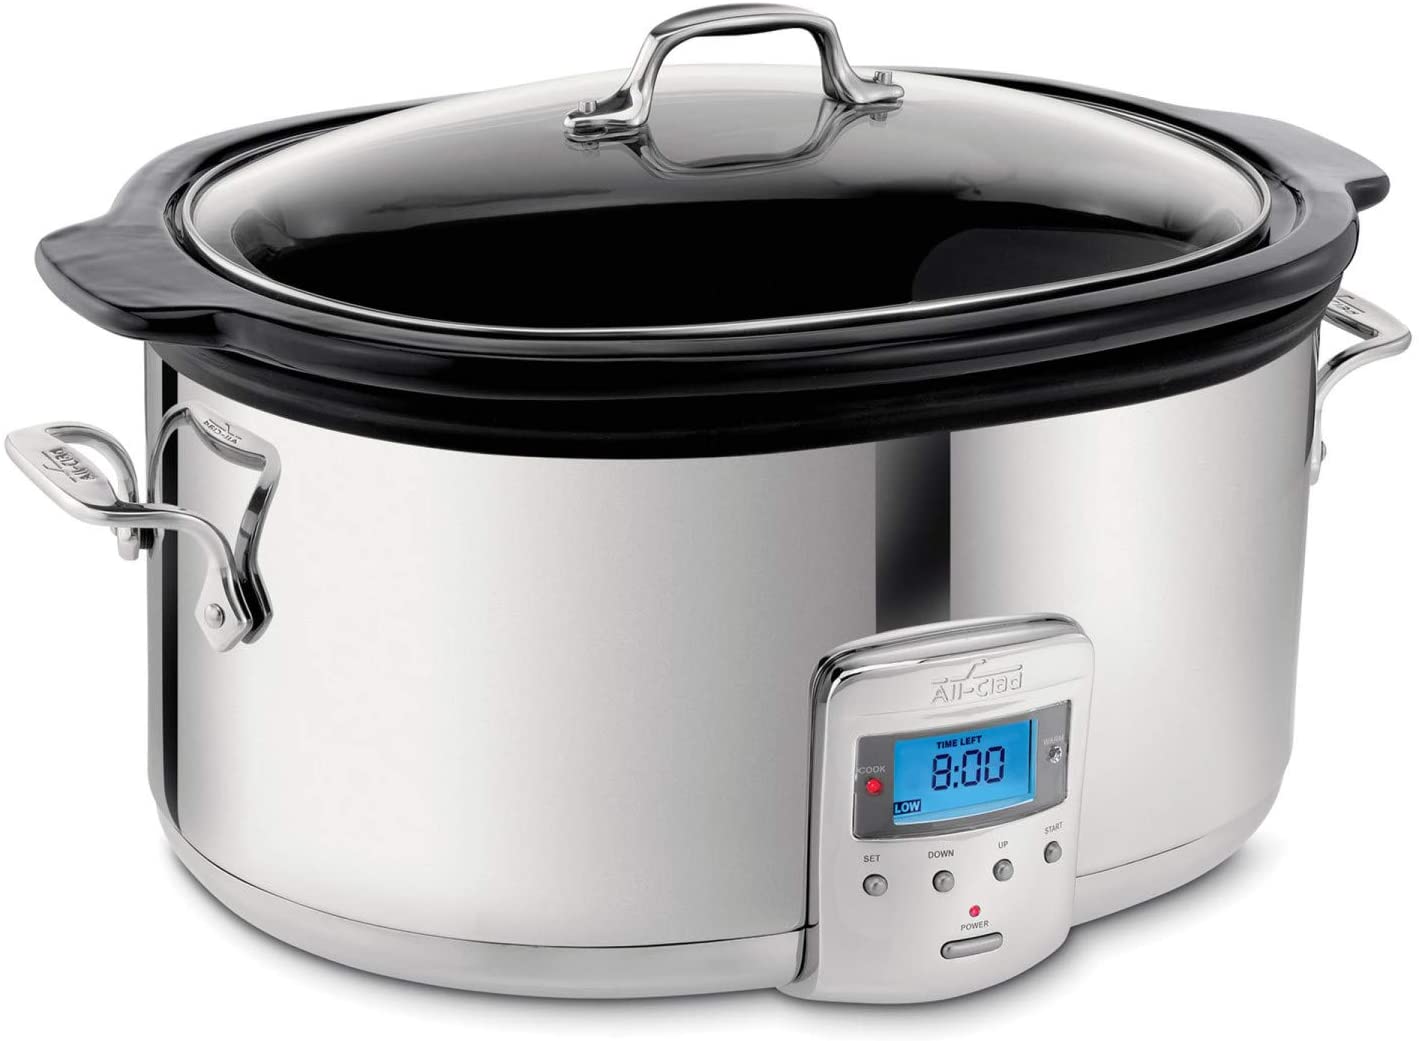 All-Clad LCD Screen Slow Cooker, 6.5-Quart